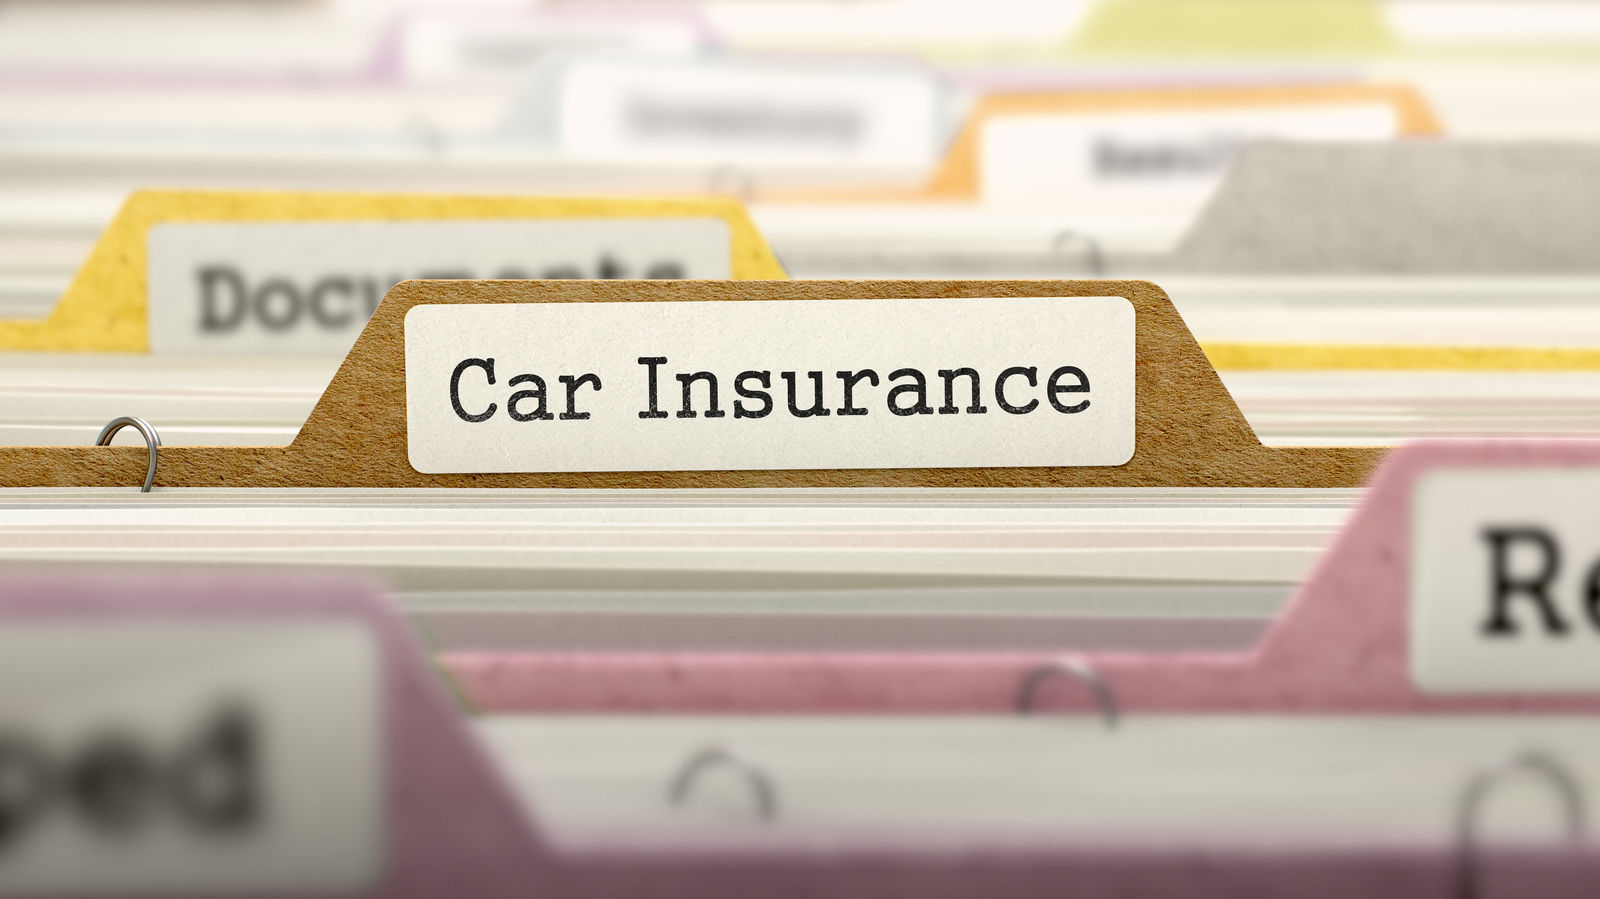 How do you find out if a car has insurance?